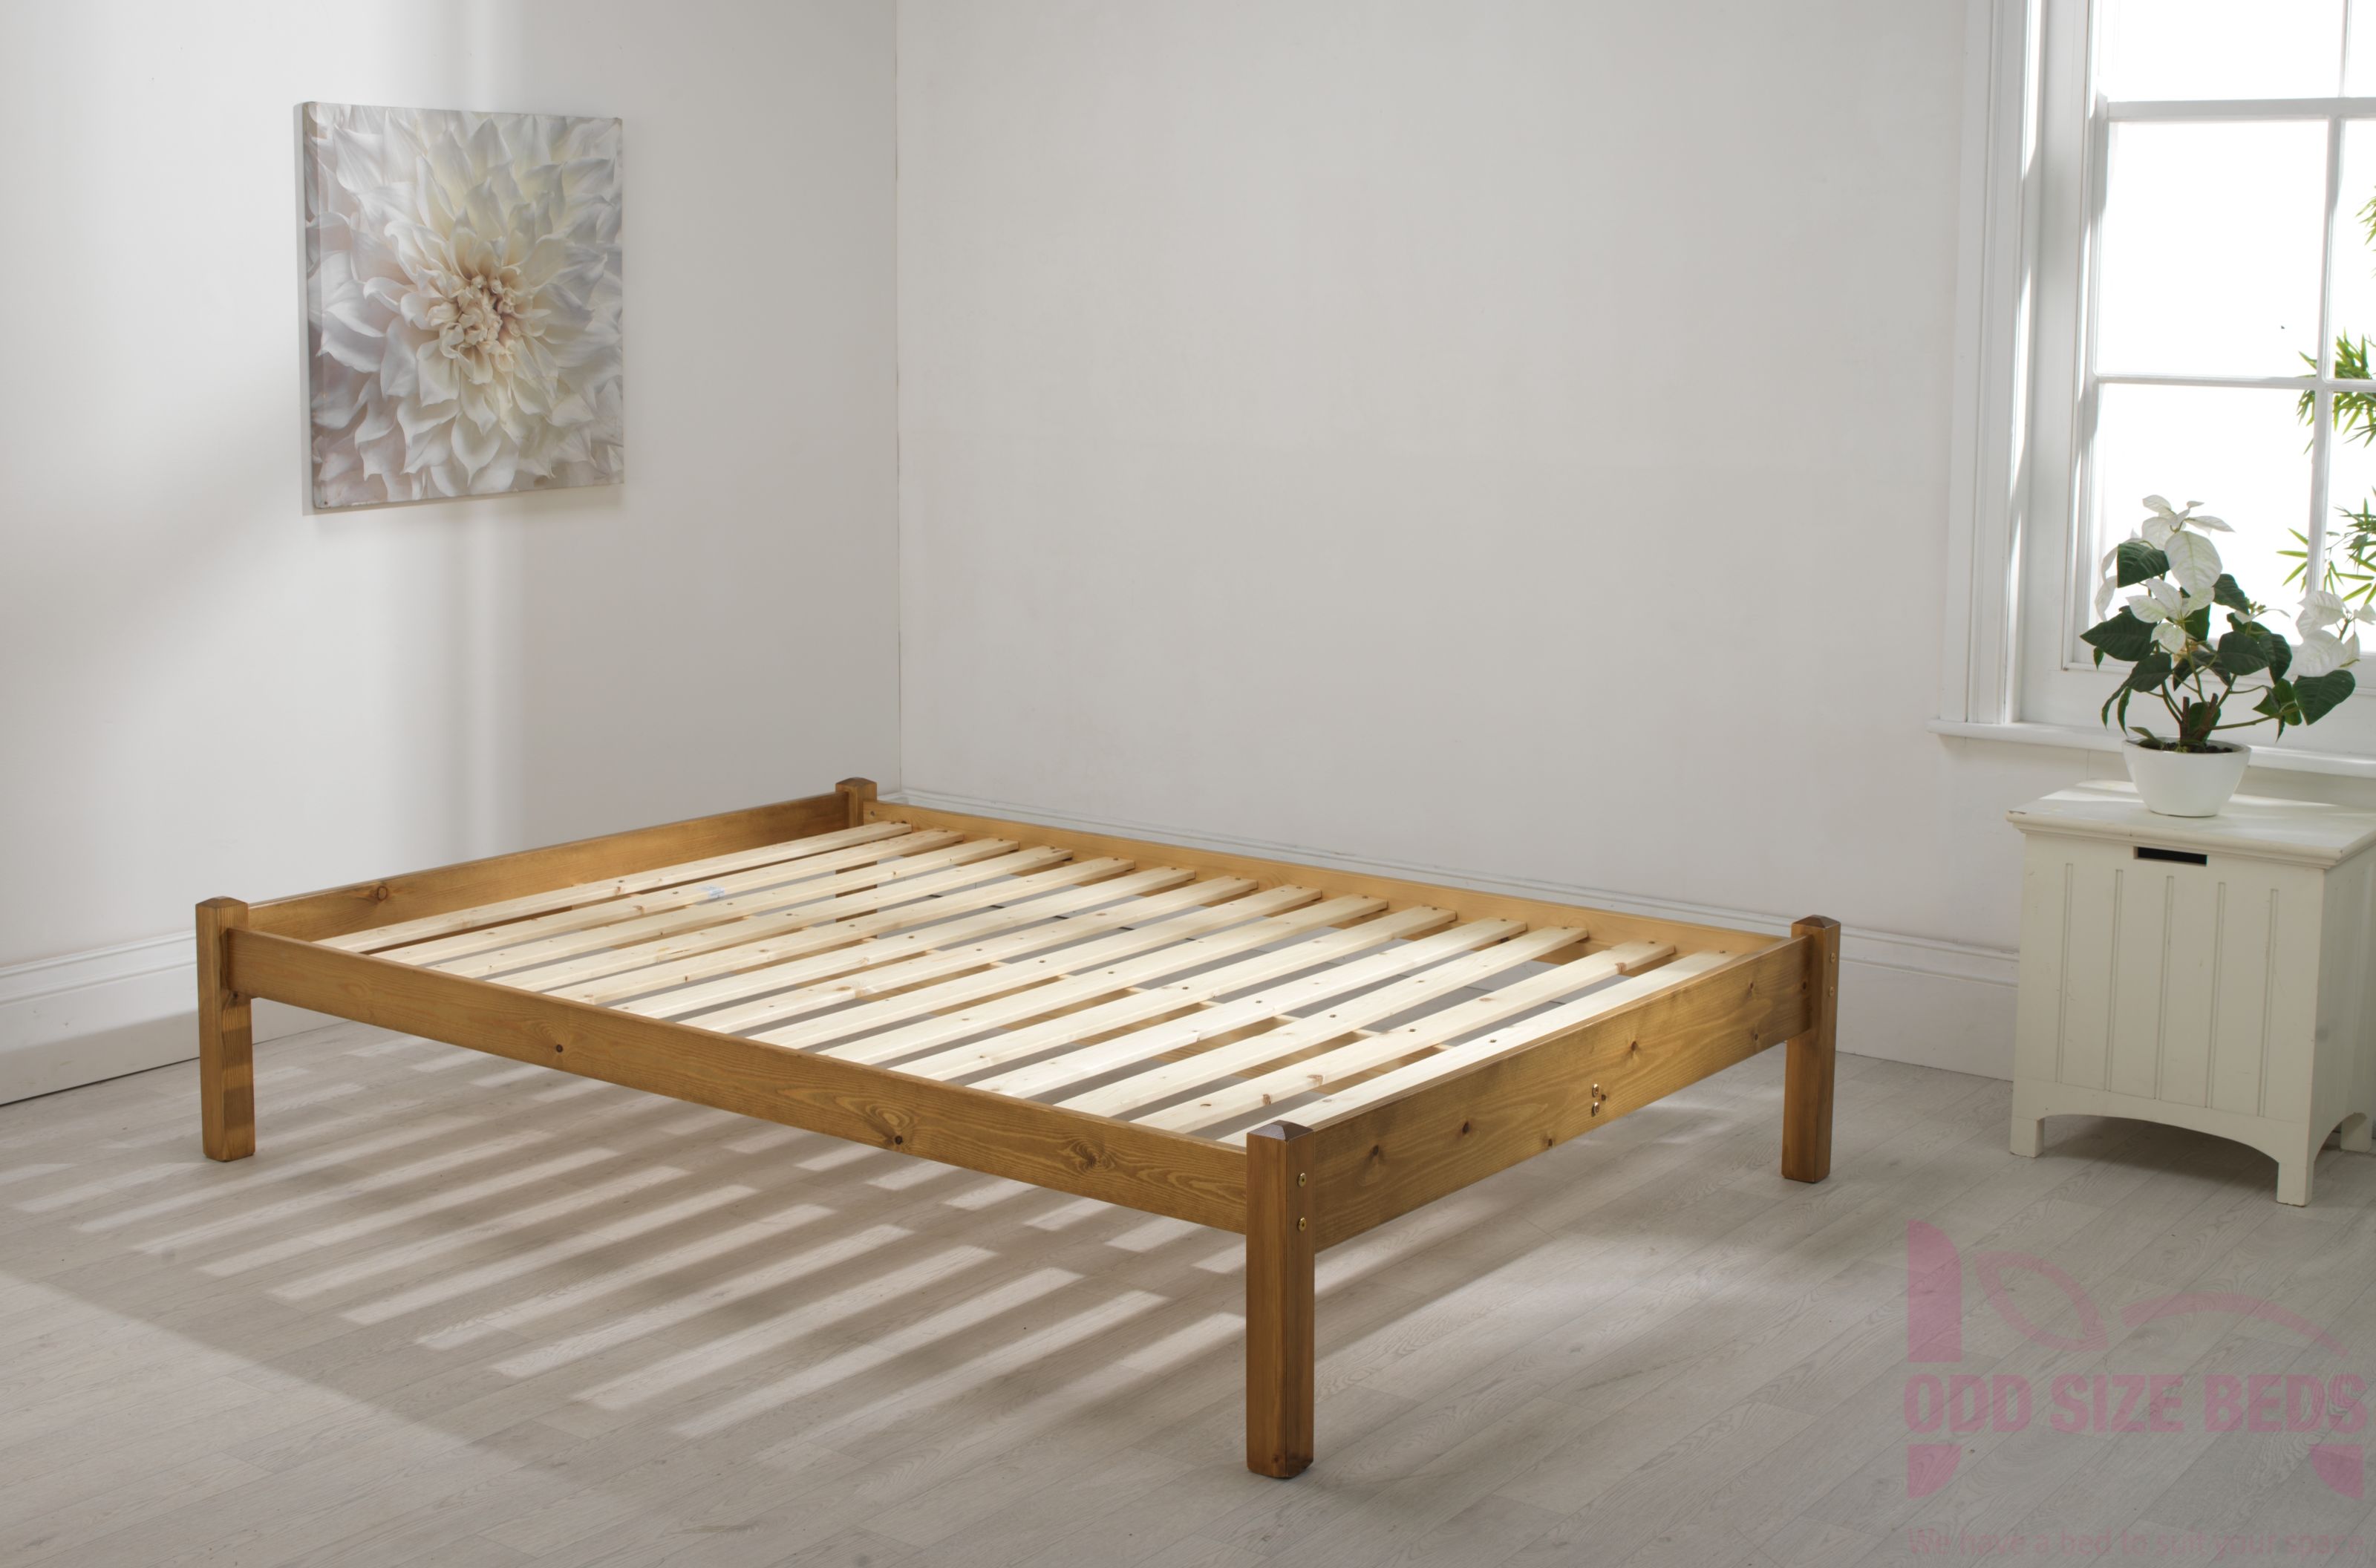 Friendship Mill Beds Studio Wooden Bed, Wooden King Size Bed Frame No Headboard